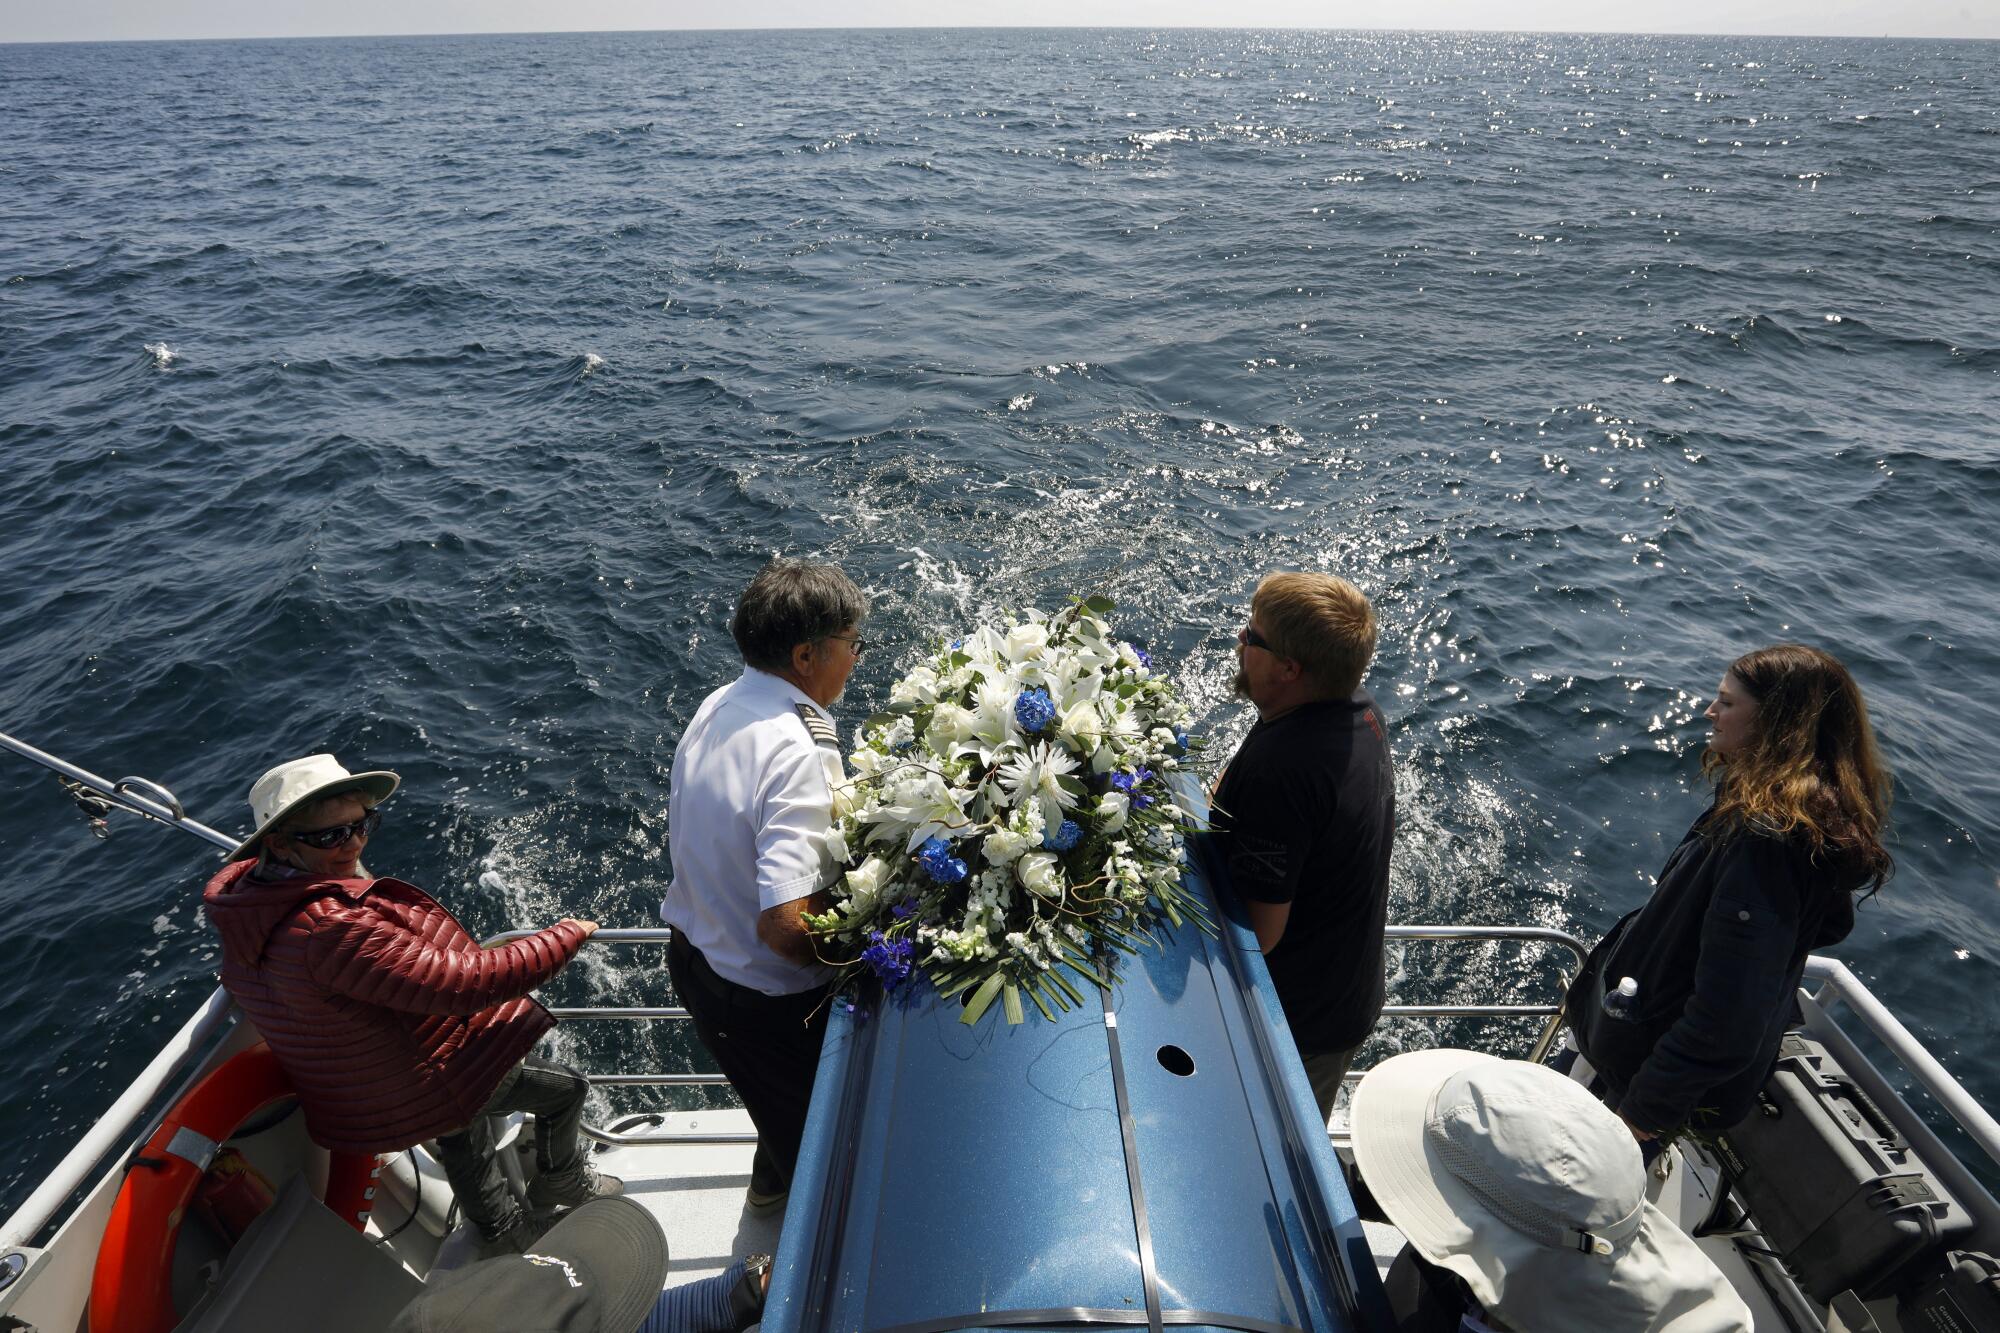 Diane Berol, left, watches as the casket of her husband, John Berol, is lowered into the sea